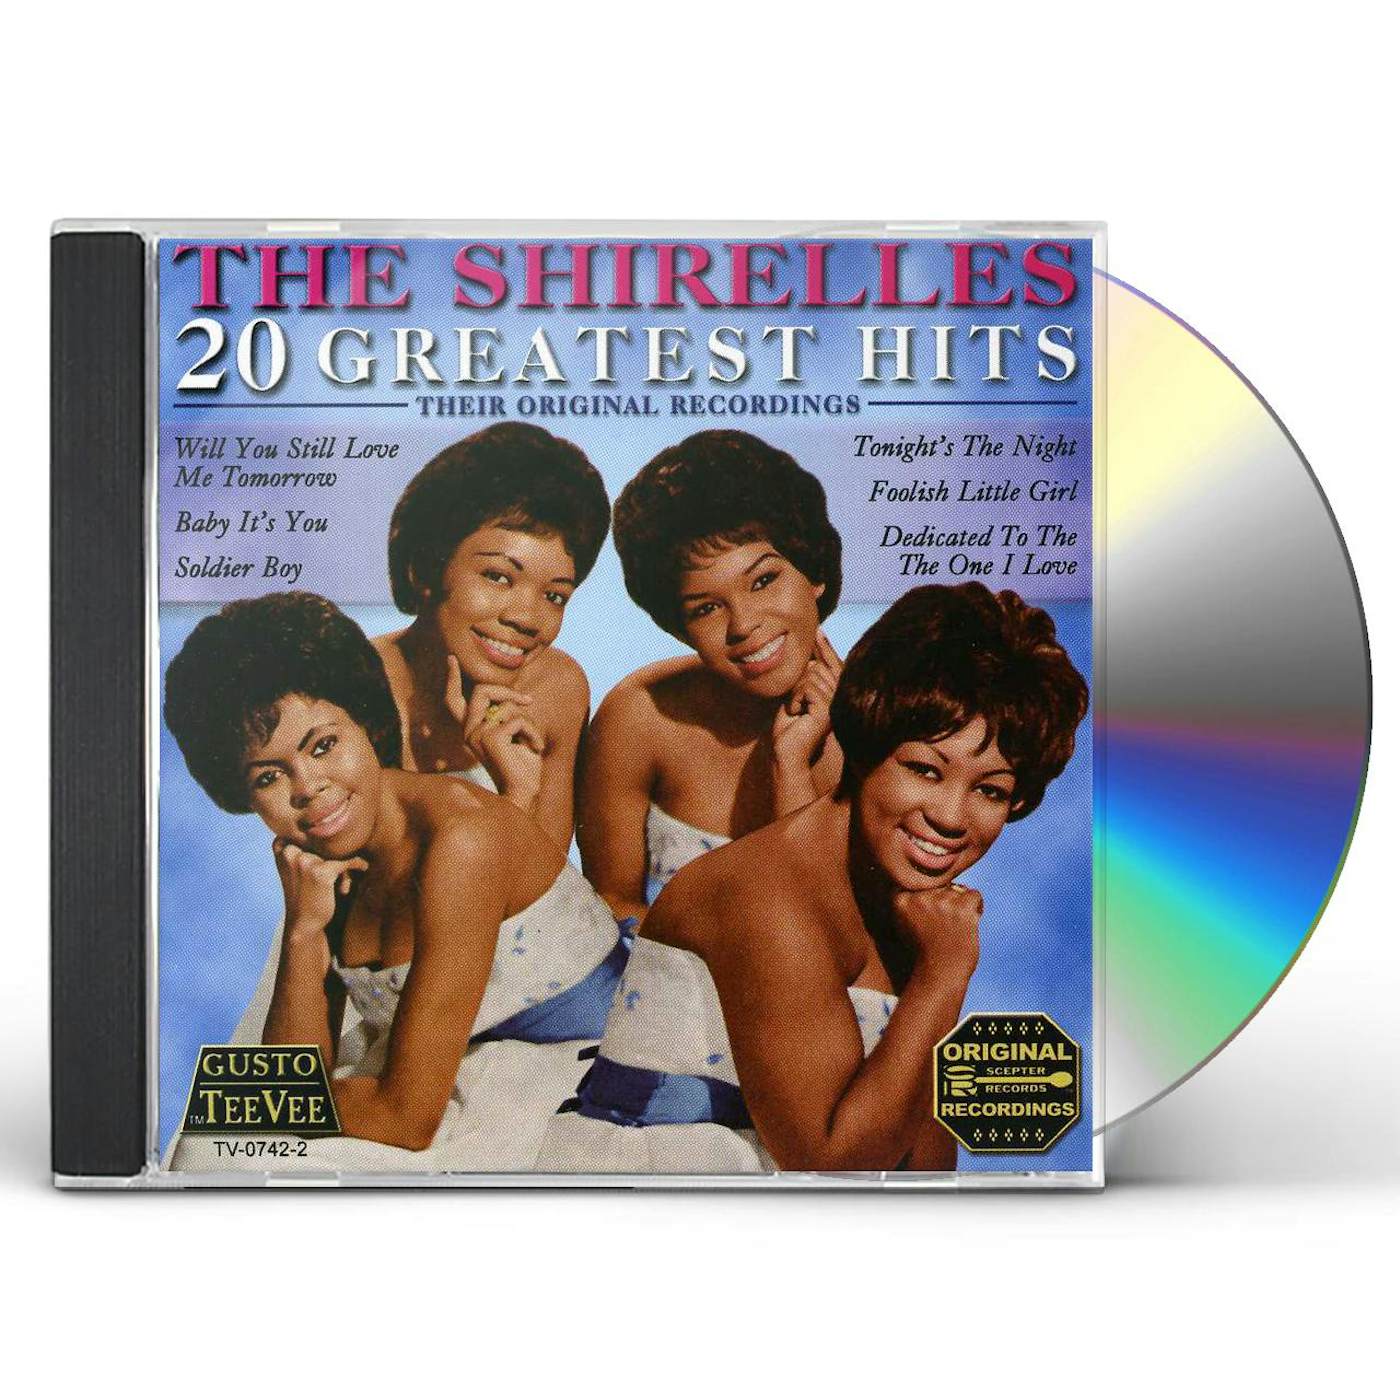 The Shirelles 20 GREATEST HITS CD